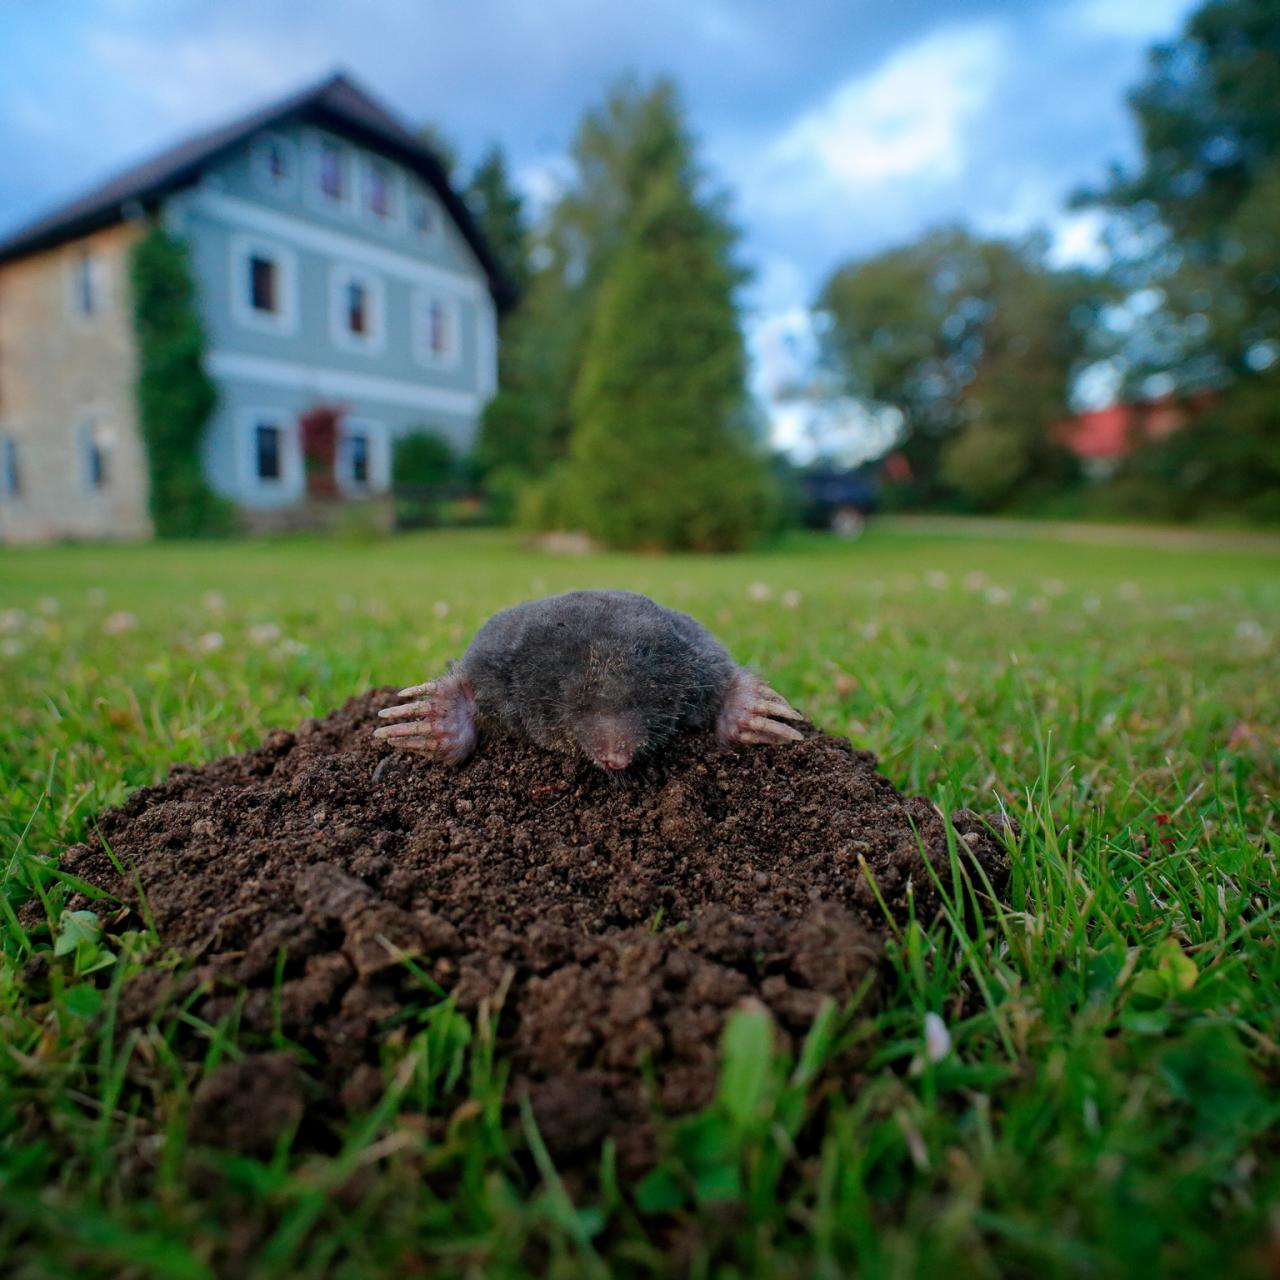 Thought I had a vole problem, turns out it was a mole problem